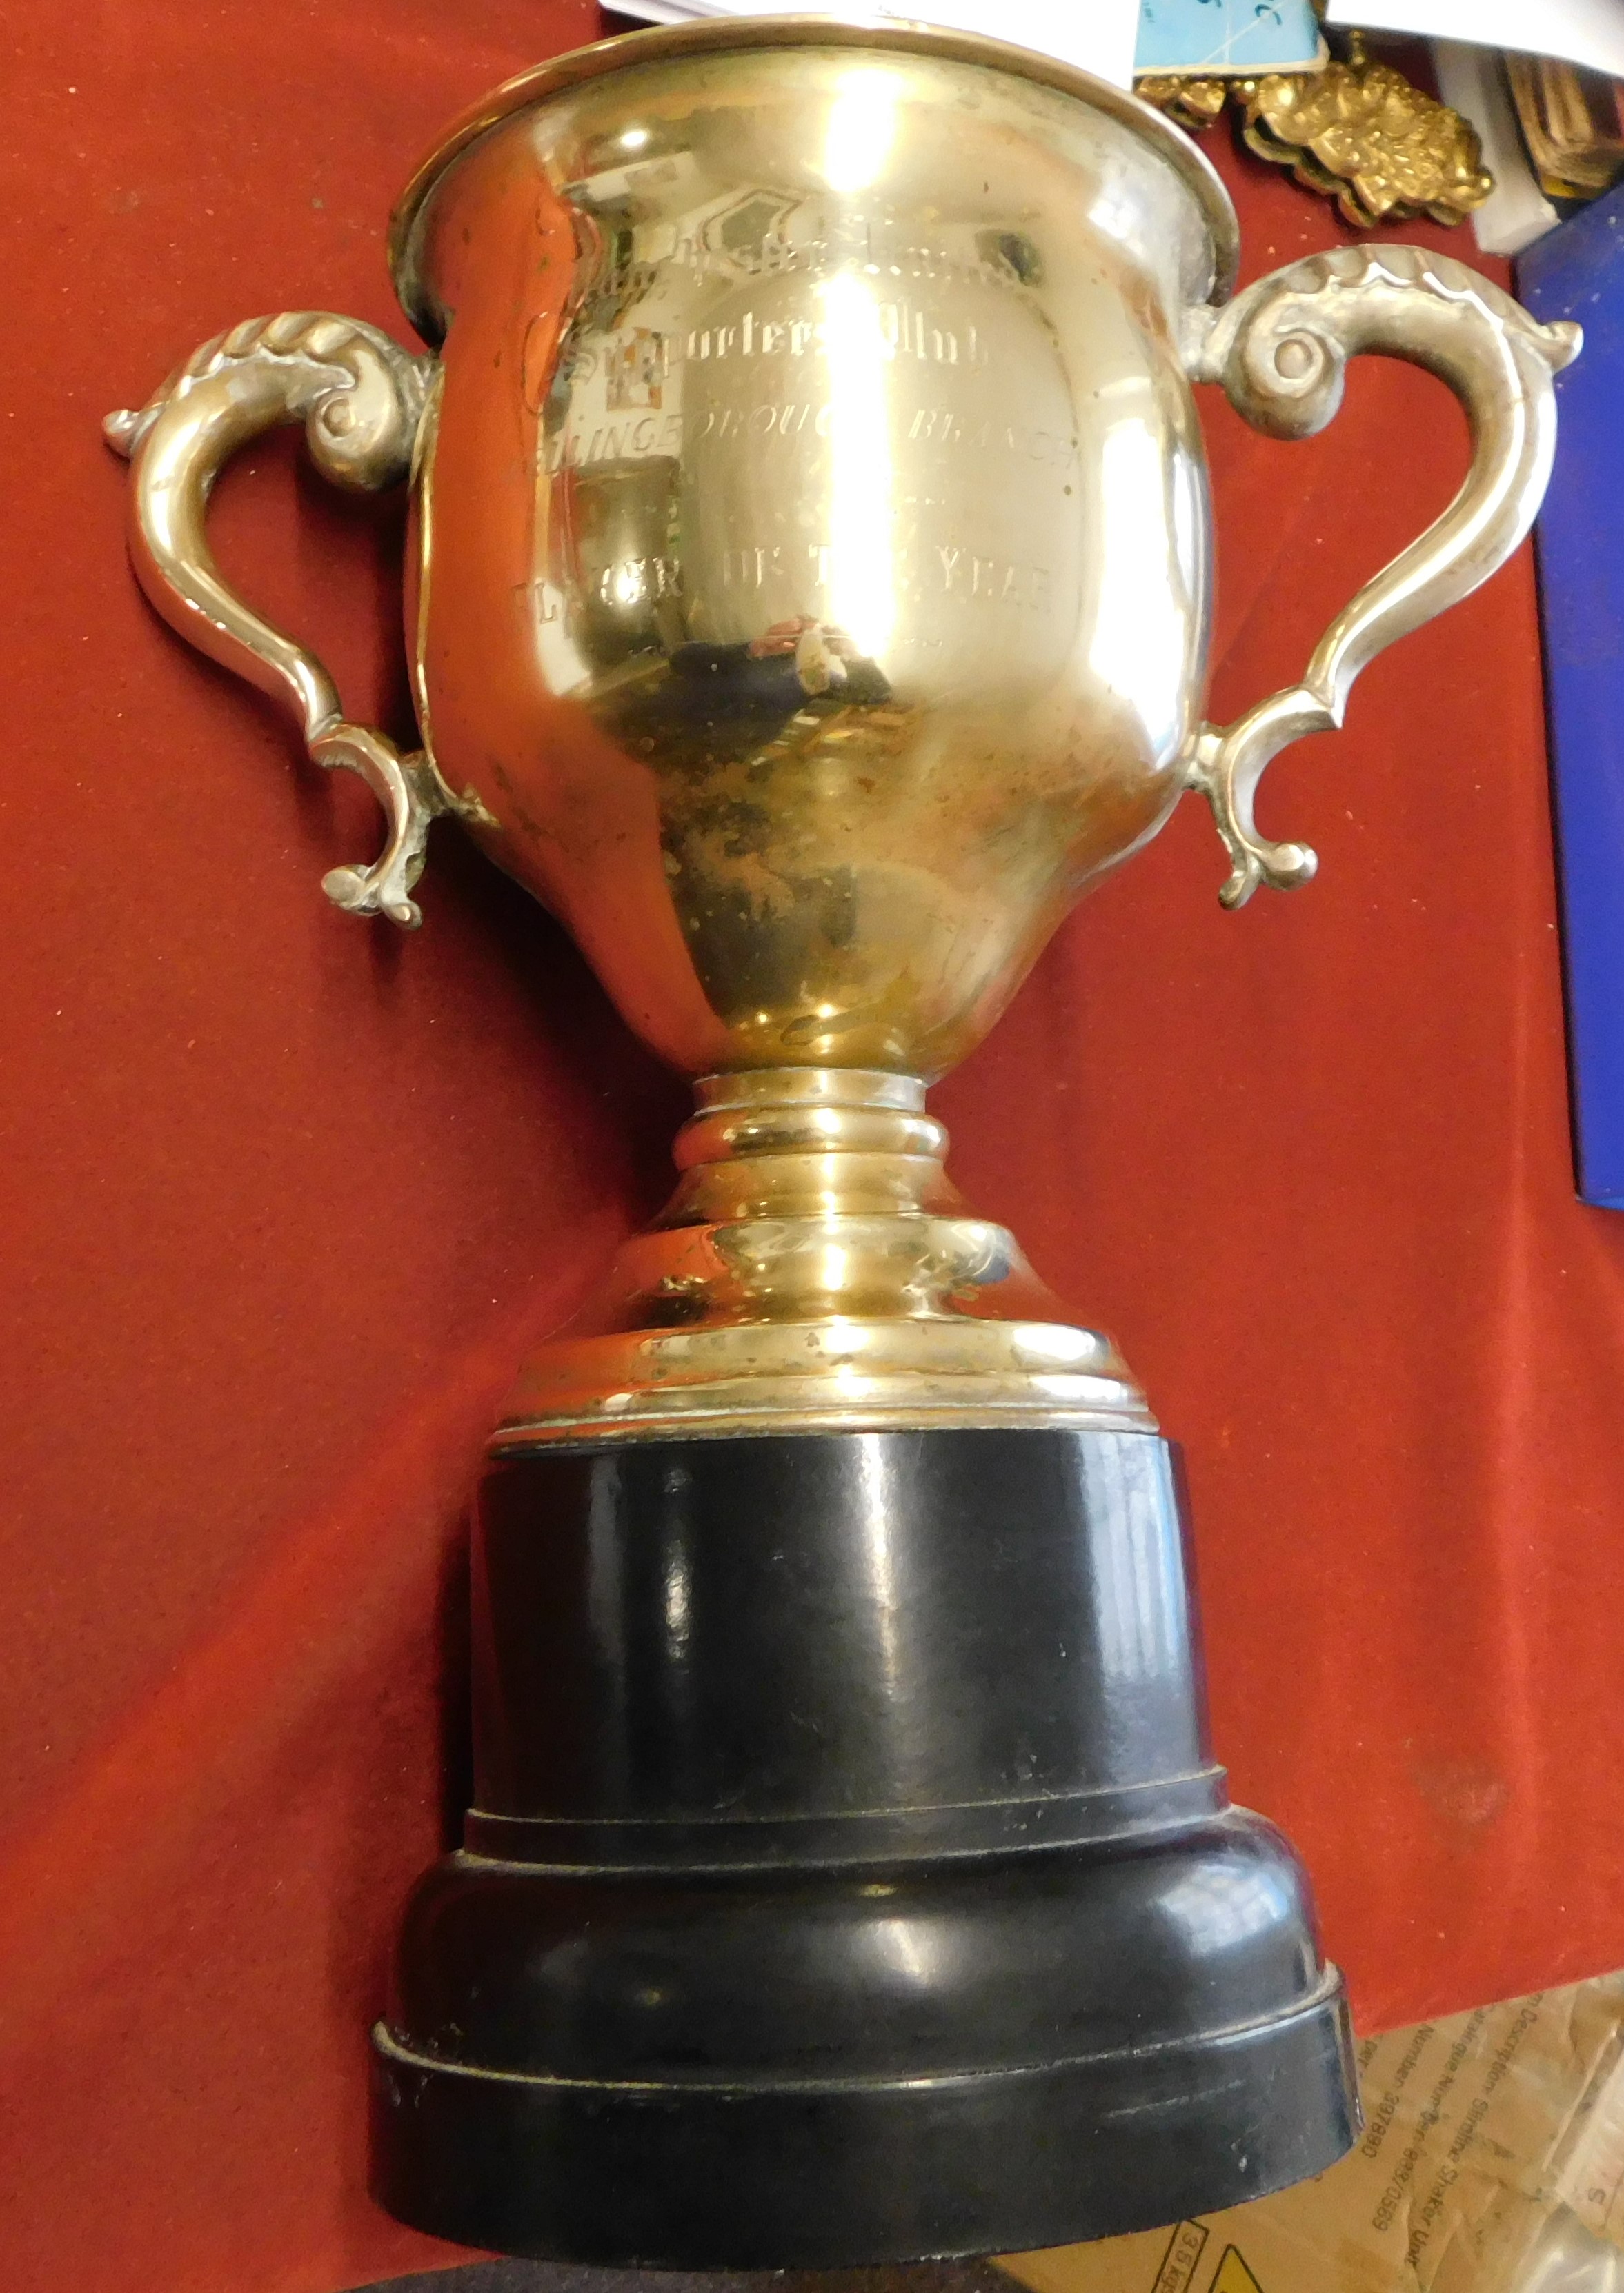 A 38cm high engraved trophy presented to the Manchester United Player of the Year by the